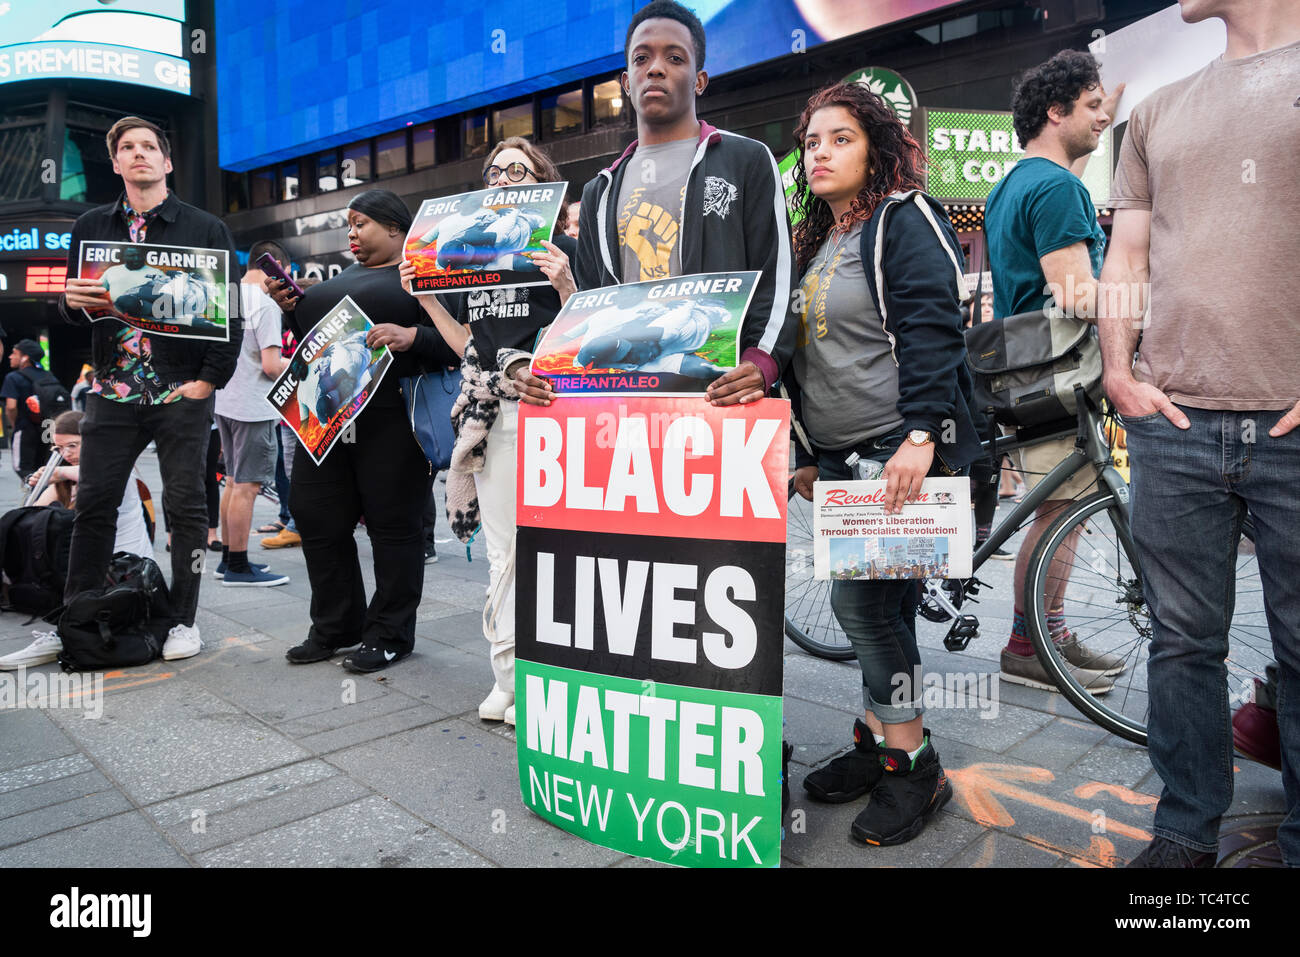 New York, United States. 04th June, 2019. Protesters rallied in Times Square in New York City demanding the firing of Officer Pantaleo for the choking death of Eric Garner in 2014. Daniel Pantaleo is currently standing administrative trial which began on May 13. On May 21, the judge overseeing his case delayed the remainder of the hearing until June 5, 2019. Pantaleo has been on desk duty since Eric Garner's death and could face penalties ranging from loss of vacation days to firing from the NYPD. Credit: Gabriele Holtermann-Gorden/Pacific Press/Alamy Live News Stock Photo